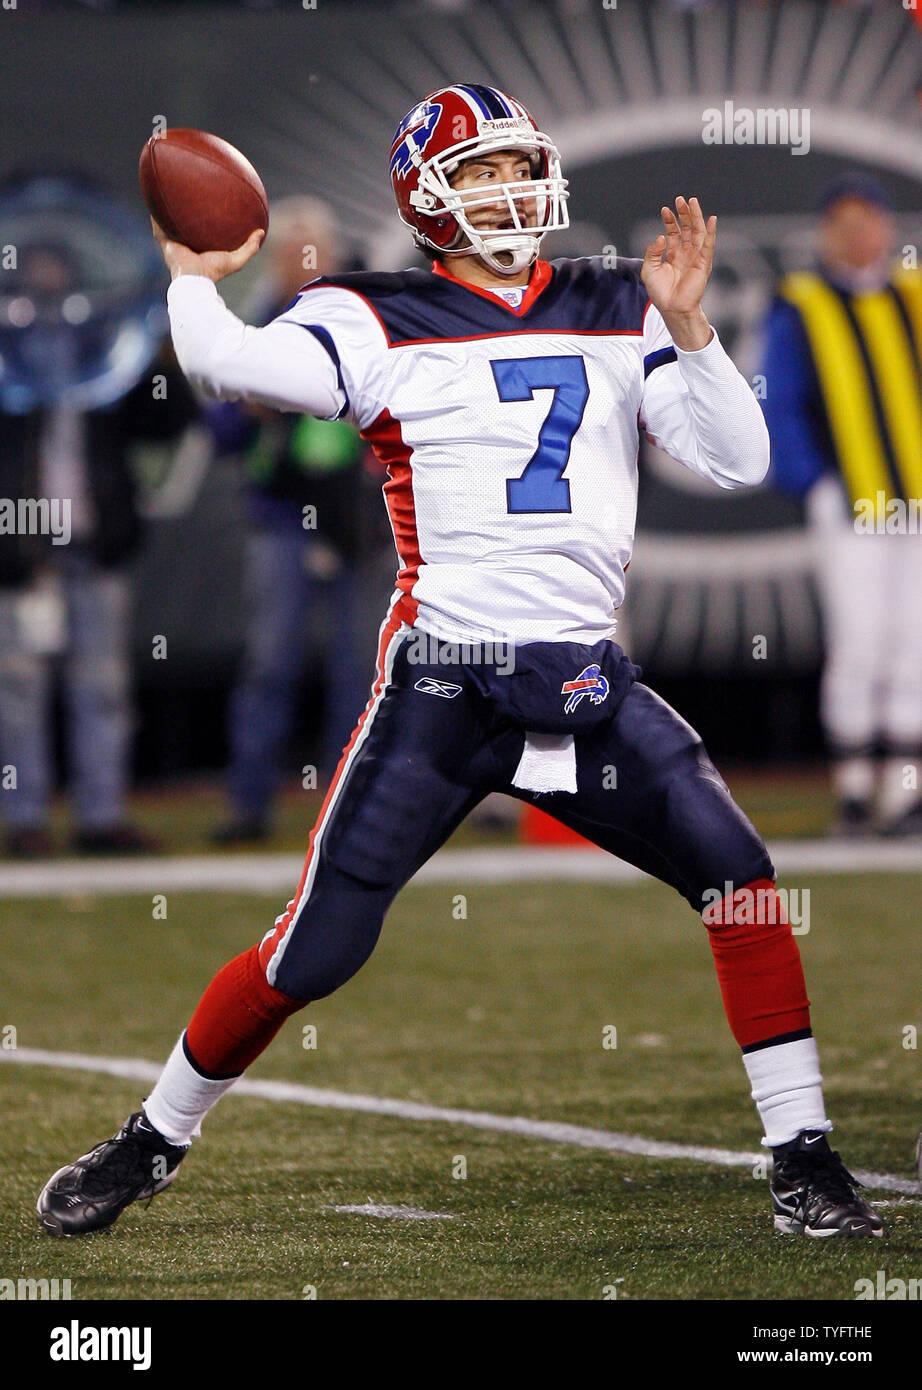 Buffalo Bills J.P. Losman prepares to throw a pass in the 2nd quarter  against the New York Jets at Giants Stadium in East Rutherford, New Jersey  on December 10, 2006. (UPI Photo/John